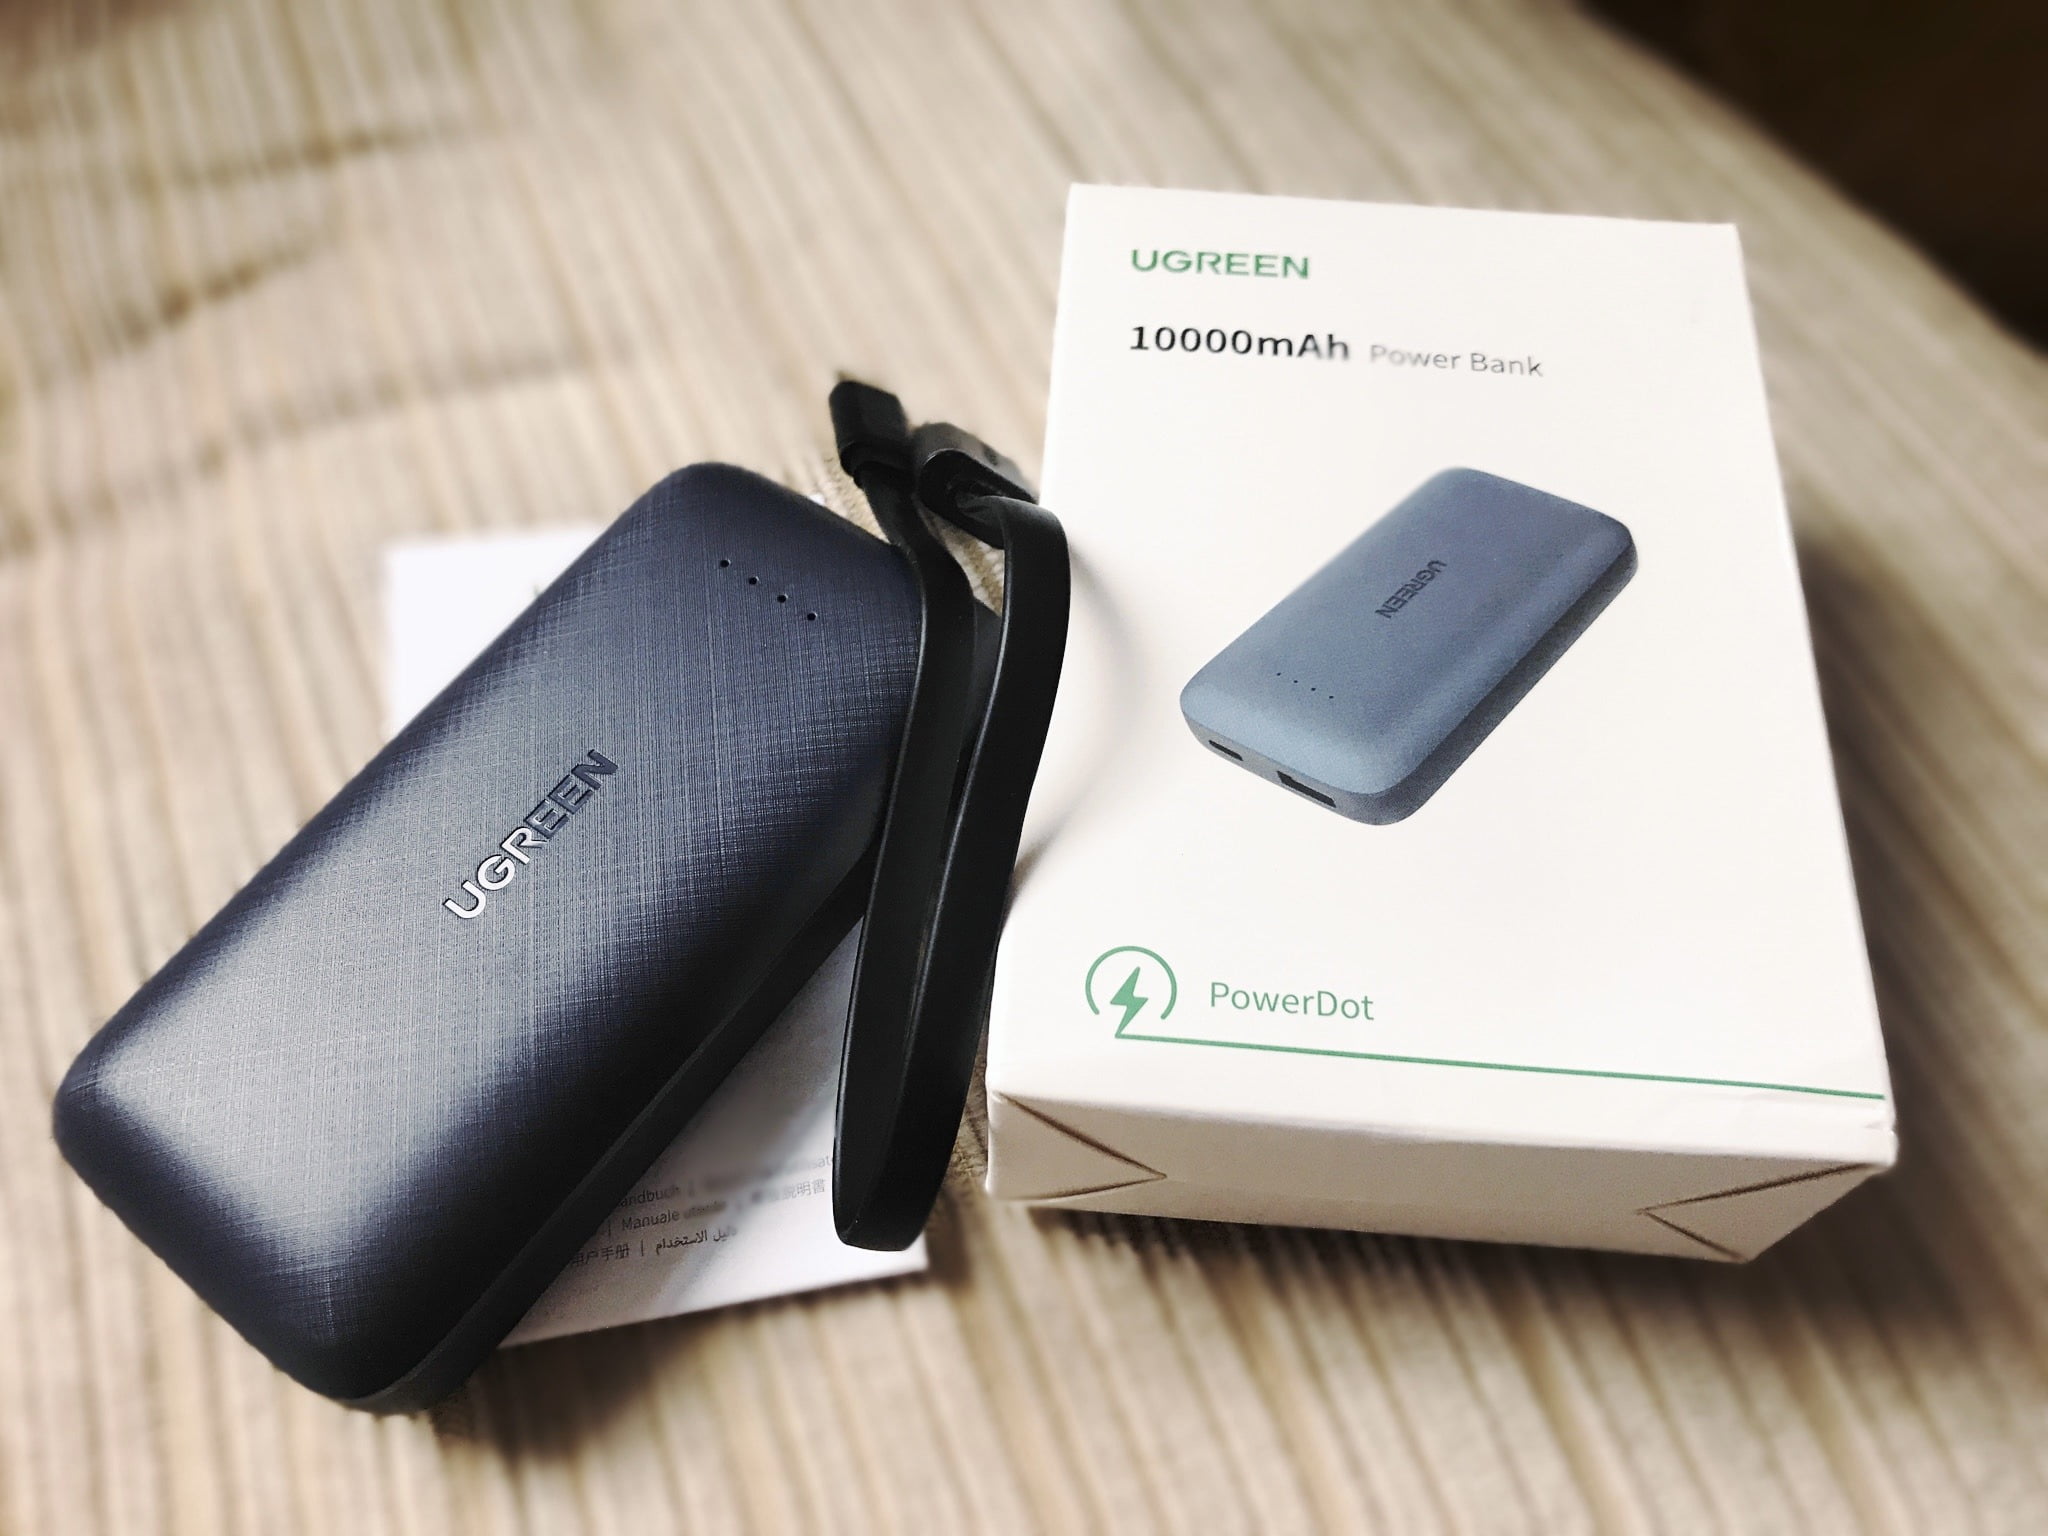 Ugreen Power Bank Review